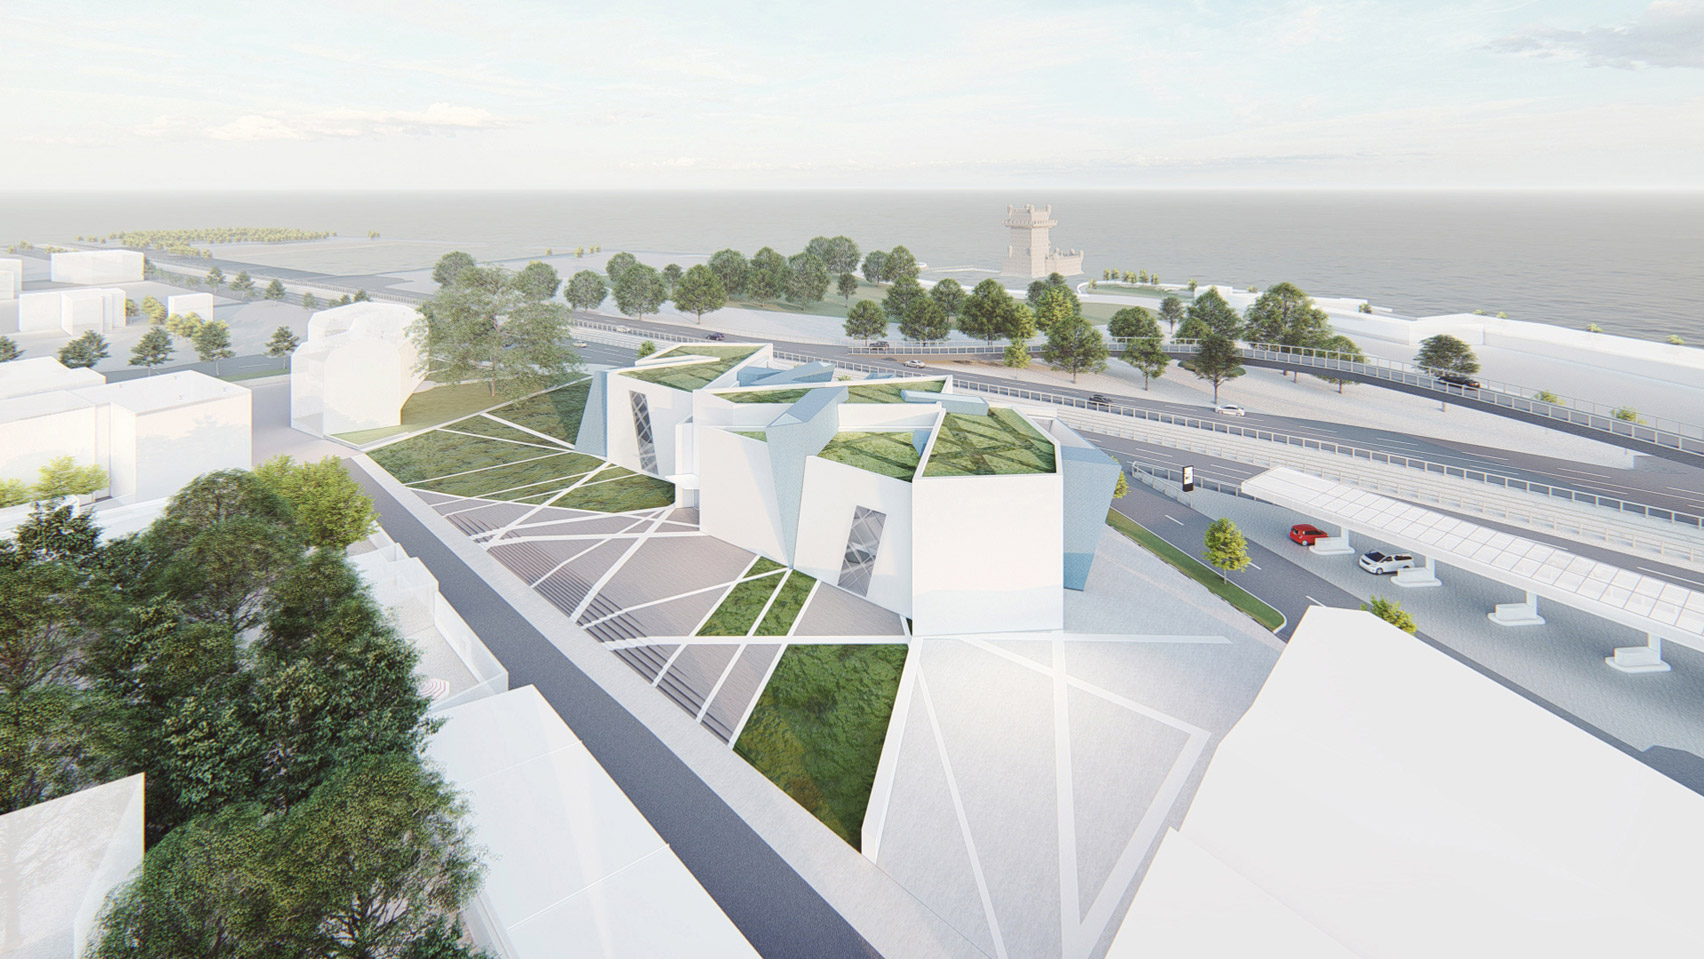 A visual of a white museum with green roofs